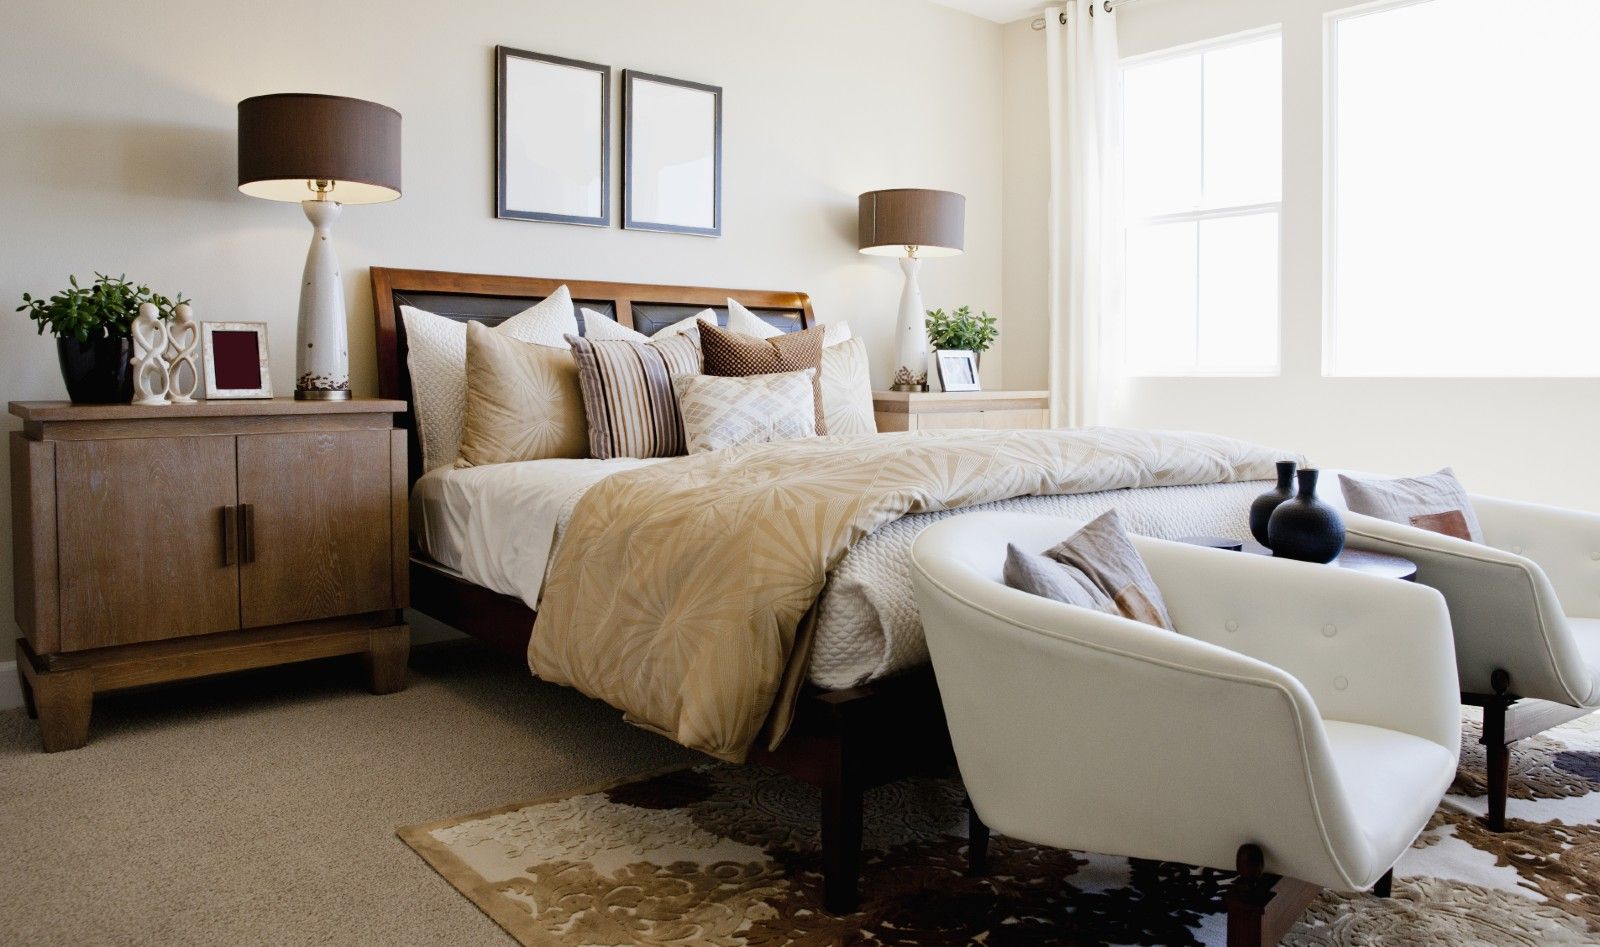 <p>                     To create a cohesive, inviting room, the experts say we should avoid picking ‘suite’ style bedroom sets.                    </p>                                      <p>                     Georgia explained, “Start with the bed first, something that draws the eye like a modern four-poster, a statement emperor bed, or silk upholstered bed head. Then choose minimal, practical furniture that works in harmony and doesn’t clutter the room.”                    </p>                                      <p>                     To help a bedroom feel like a boutique hotel she suggests choosing a velvet bed head in gray, or for something more opulent look for French-style upholstered beds with ornate detailing. Try painting or reupholstering items you already own to save on buying lots of new pieces.                   </p>                                      <p>                     "Classic hardware including chairs, vanity sets, and wardrobes can set the tone for your bedroom," says Laura, "Wooden furniture pieces can significantly increase a room’s luxurious feel."                   </p>